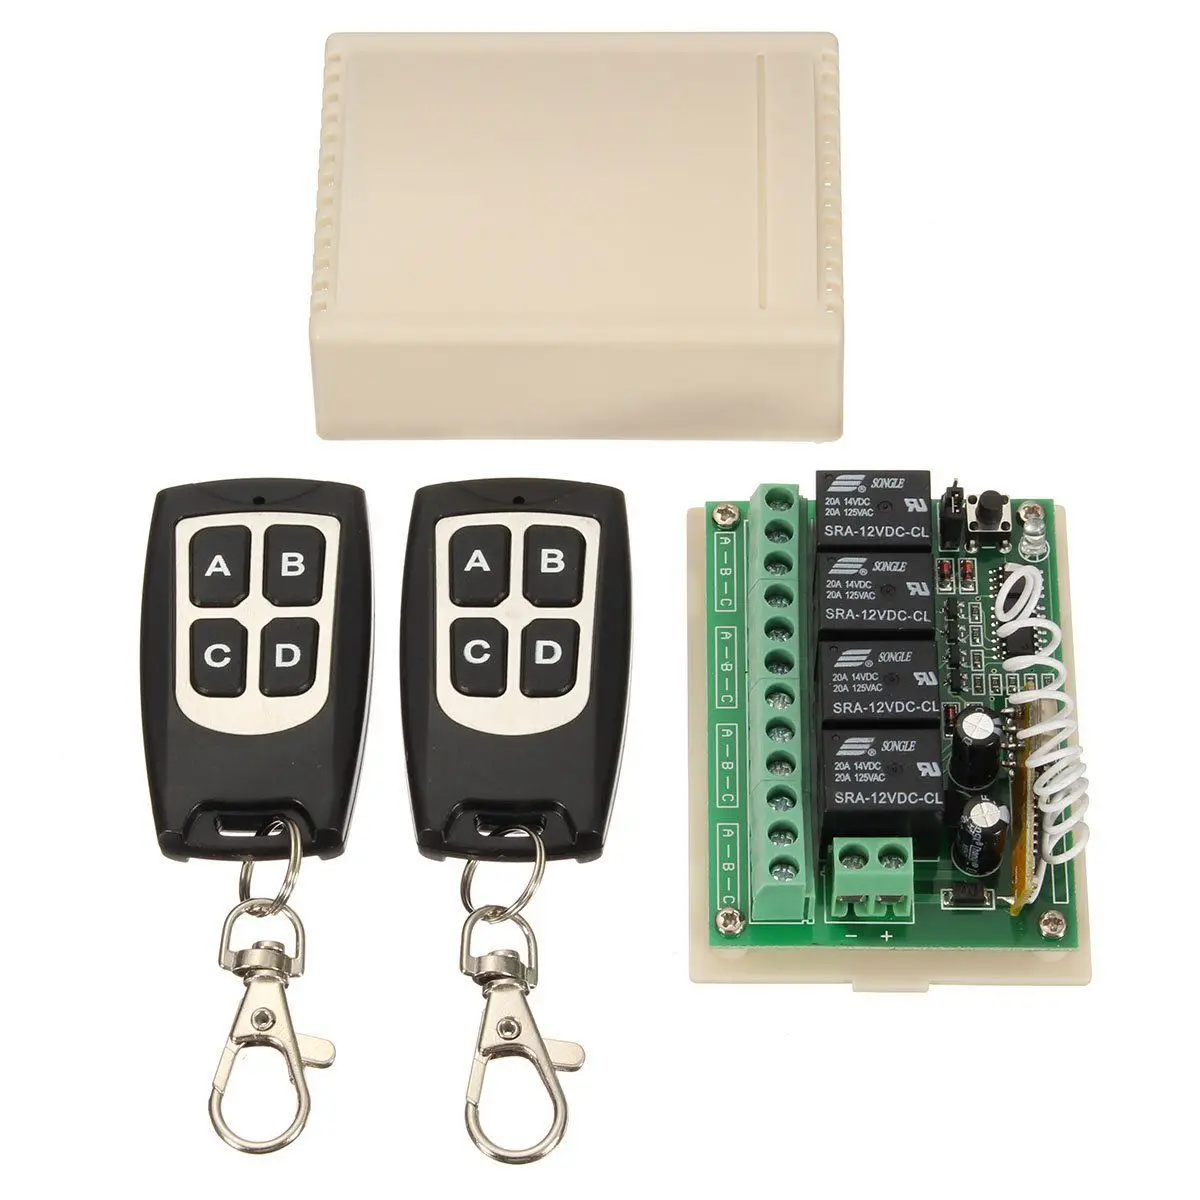 Hot sale 12V 4CH Channel 433Mhz Wireless Remote Control Switch Integrated Circuit With 2 Transmitter DIY Replace Parts Tool Ki |